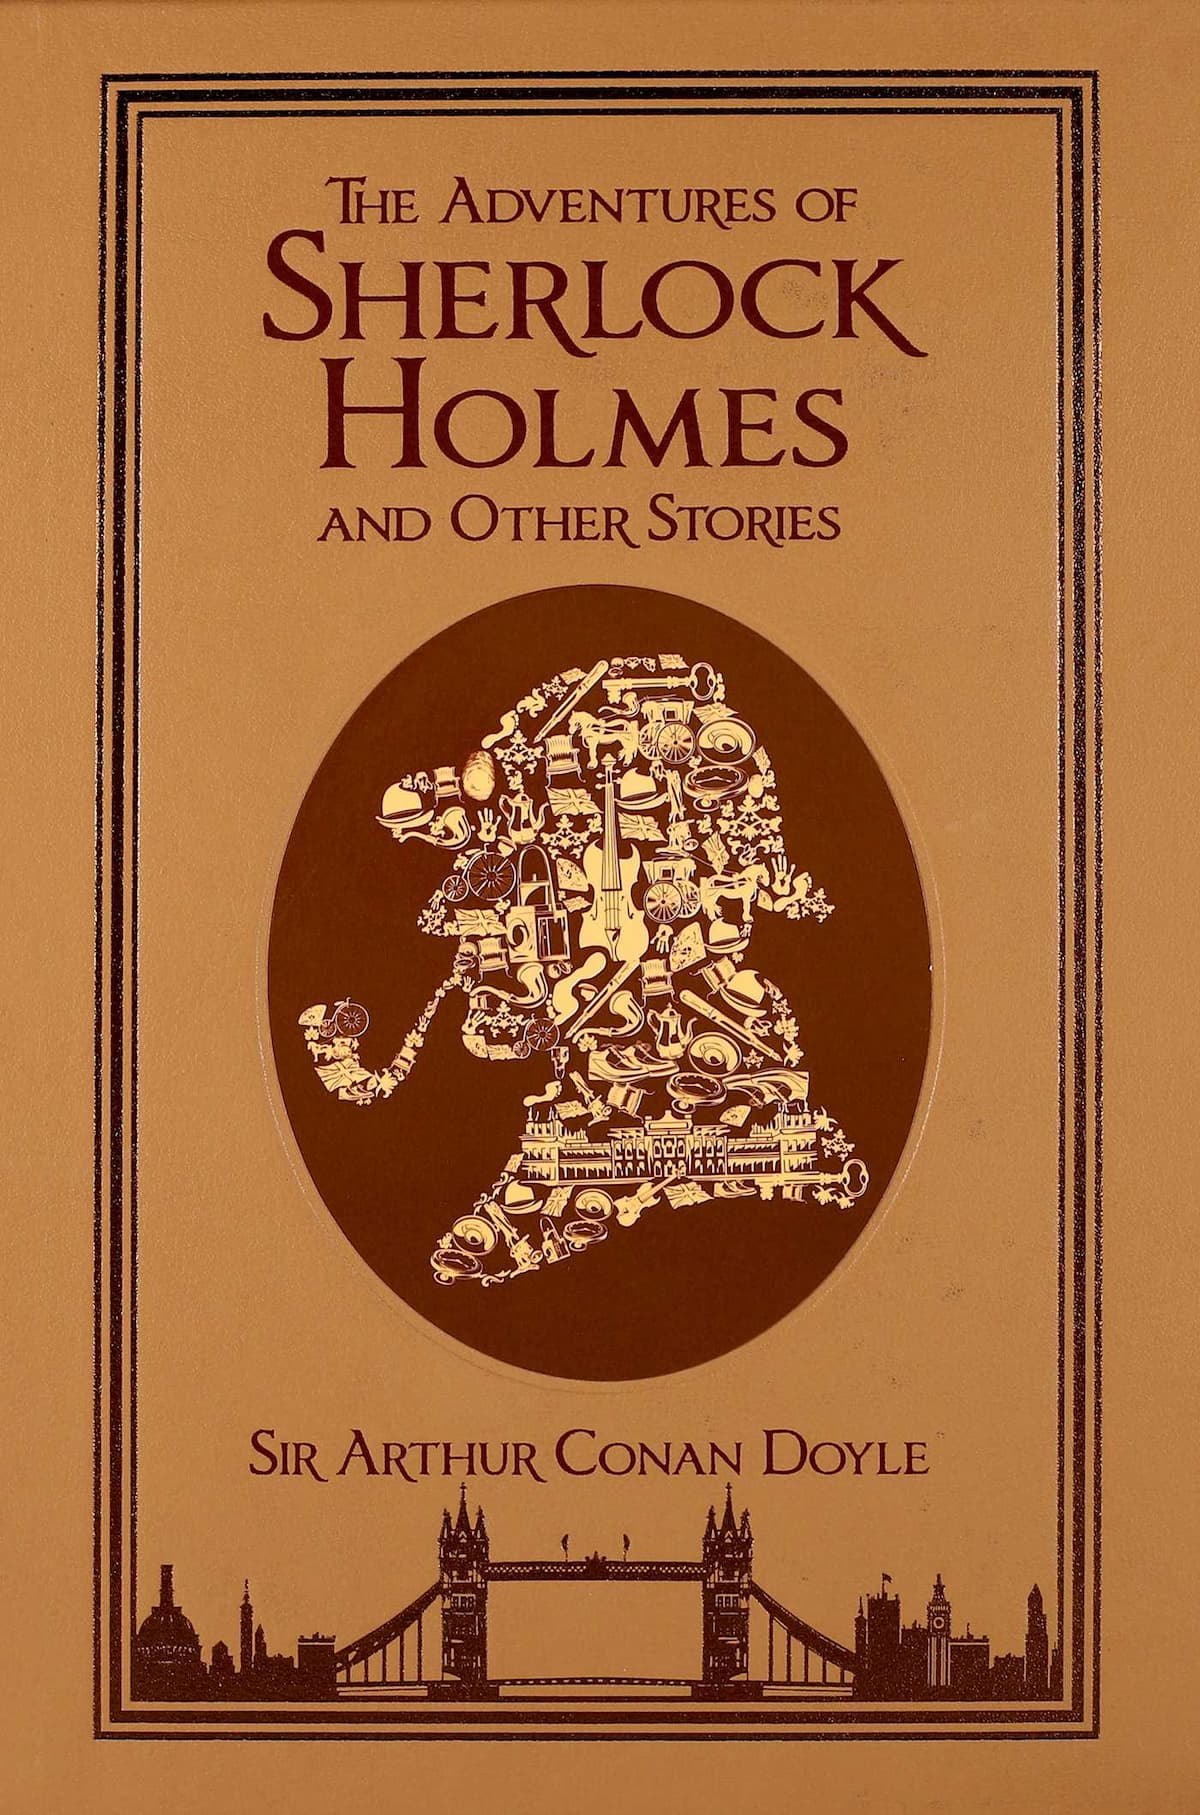 Arthur Conan Doyle: The Adventures of Sherlock Holmes, and Other Stories